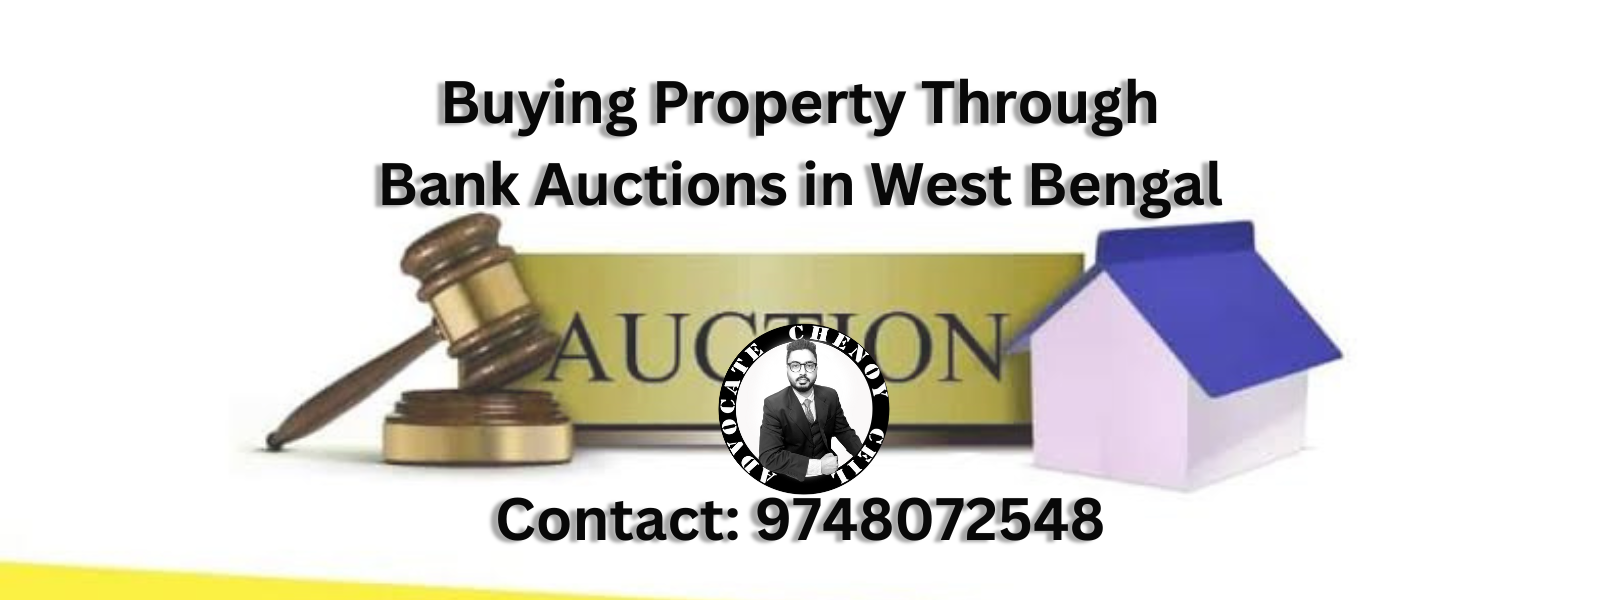 Buy property through bank auctions in West Bengal